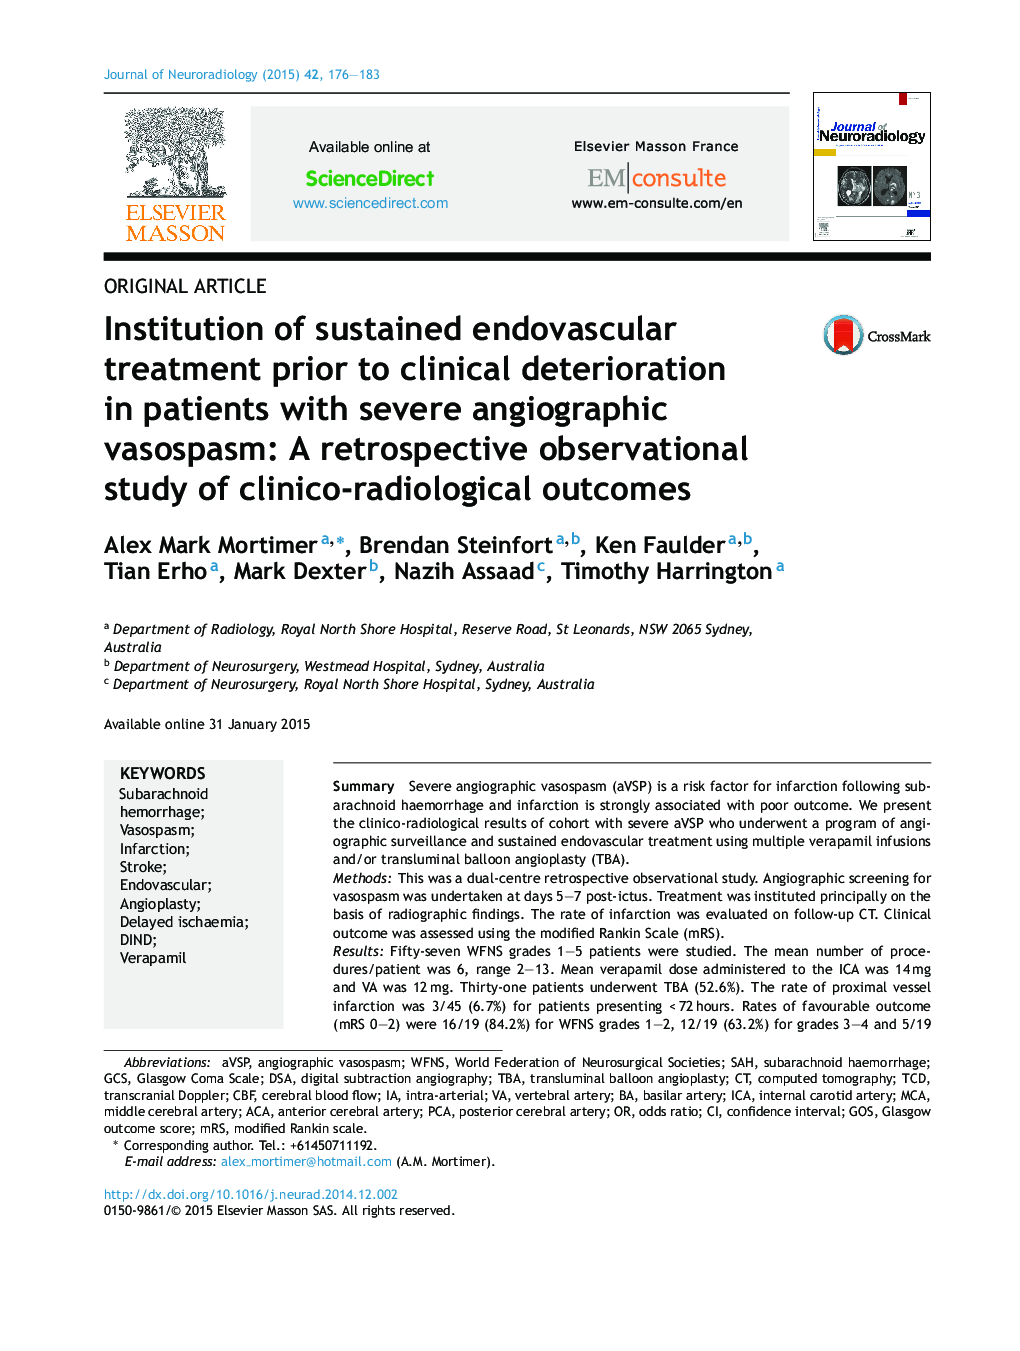 Institution of sustained endovascular treatment prior to clinical deterioration in patients with severe angiographic vasospasm: A retrospective observational study of clinico-radiological outcomes